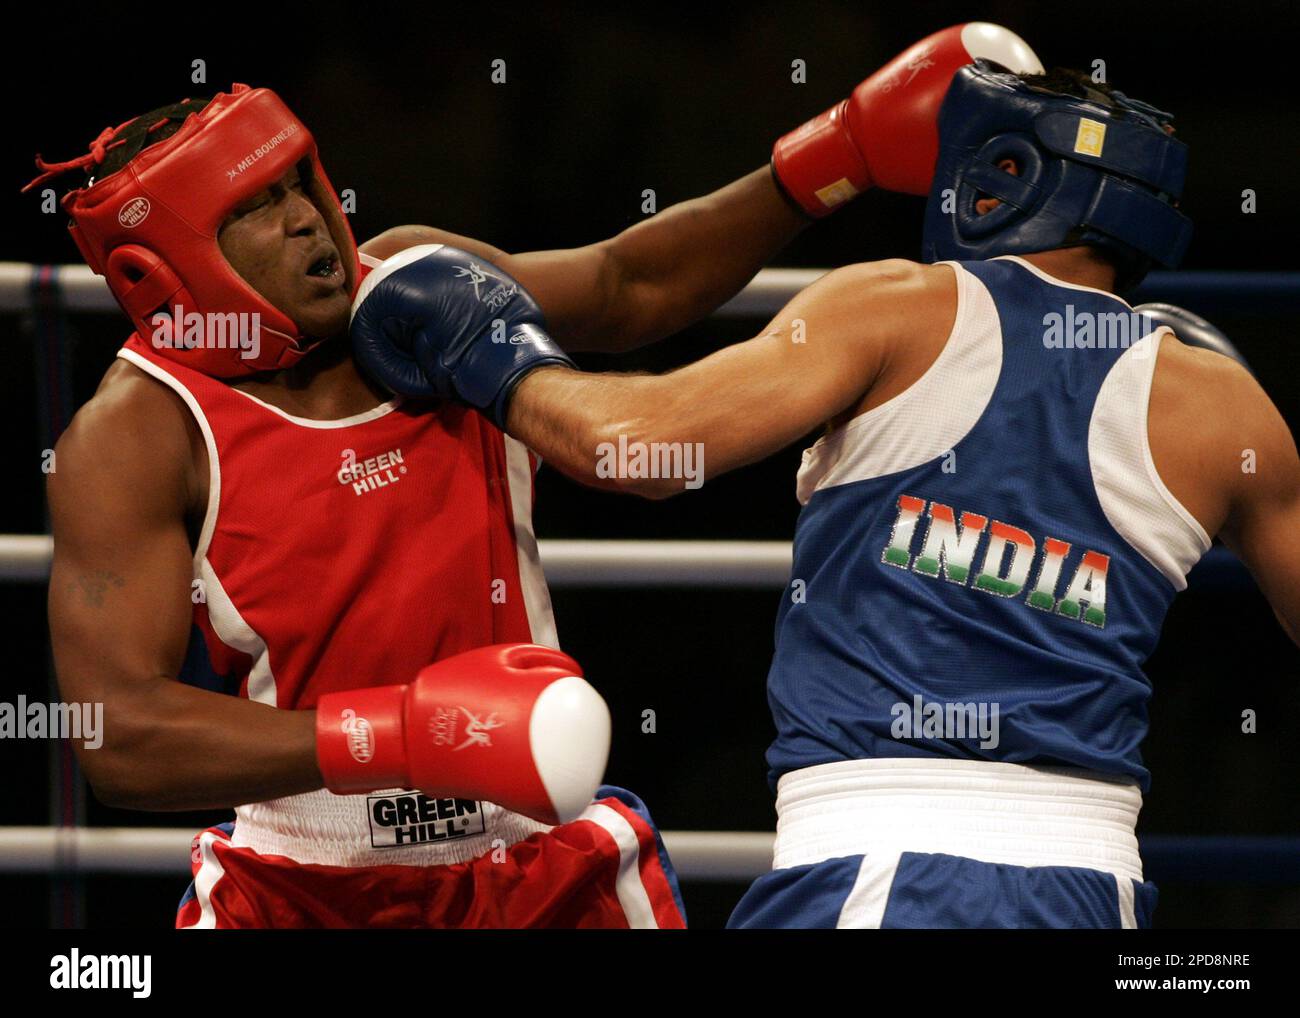 Indias Harpreet Singh, right, punches Barbados Anderson Fitzgerald Emmanuel during the 2006 Commonwealth Games boxing heavyweight